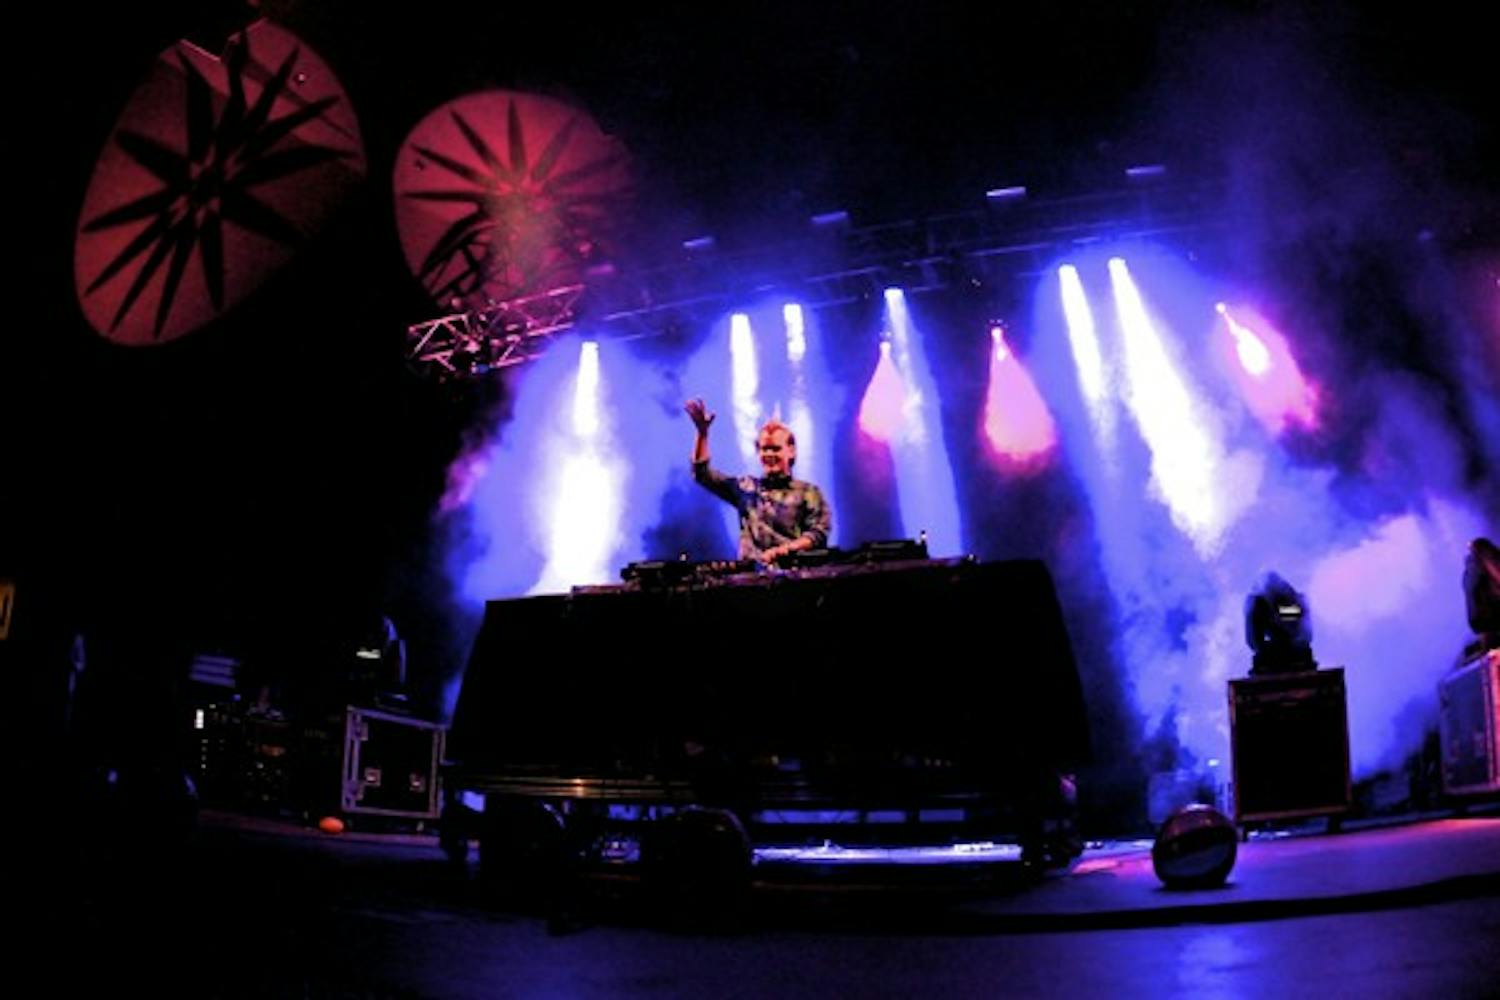 GLOW SHOW: Avicii performs for thousands at GLOWfest on Thursday at the Mesa Amphitheatre. (Photo by Sam Rosenbaum)